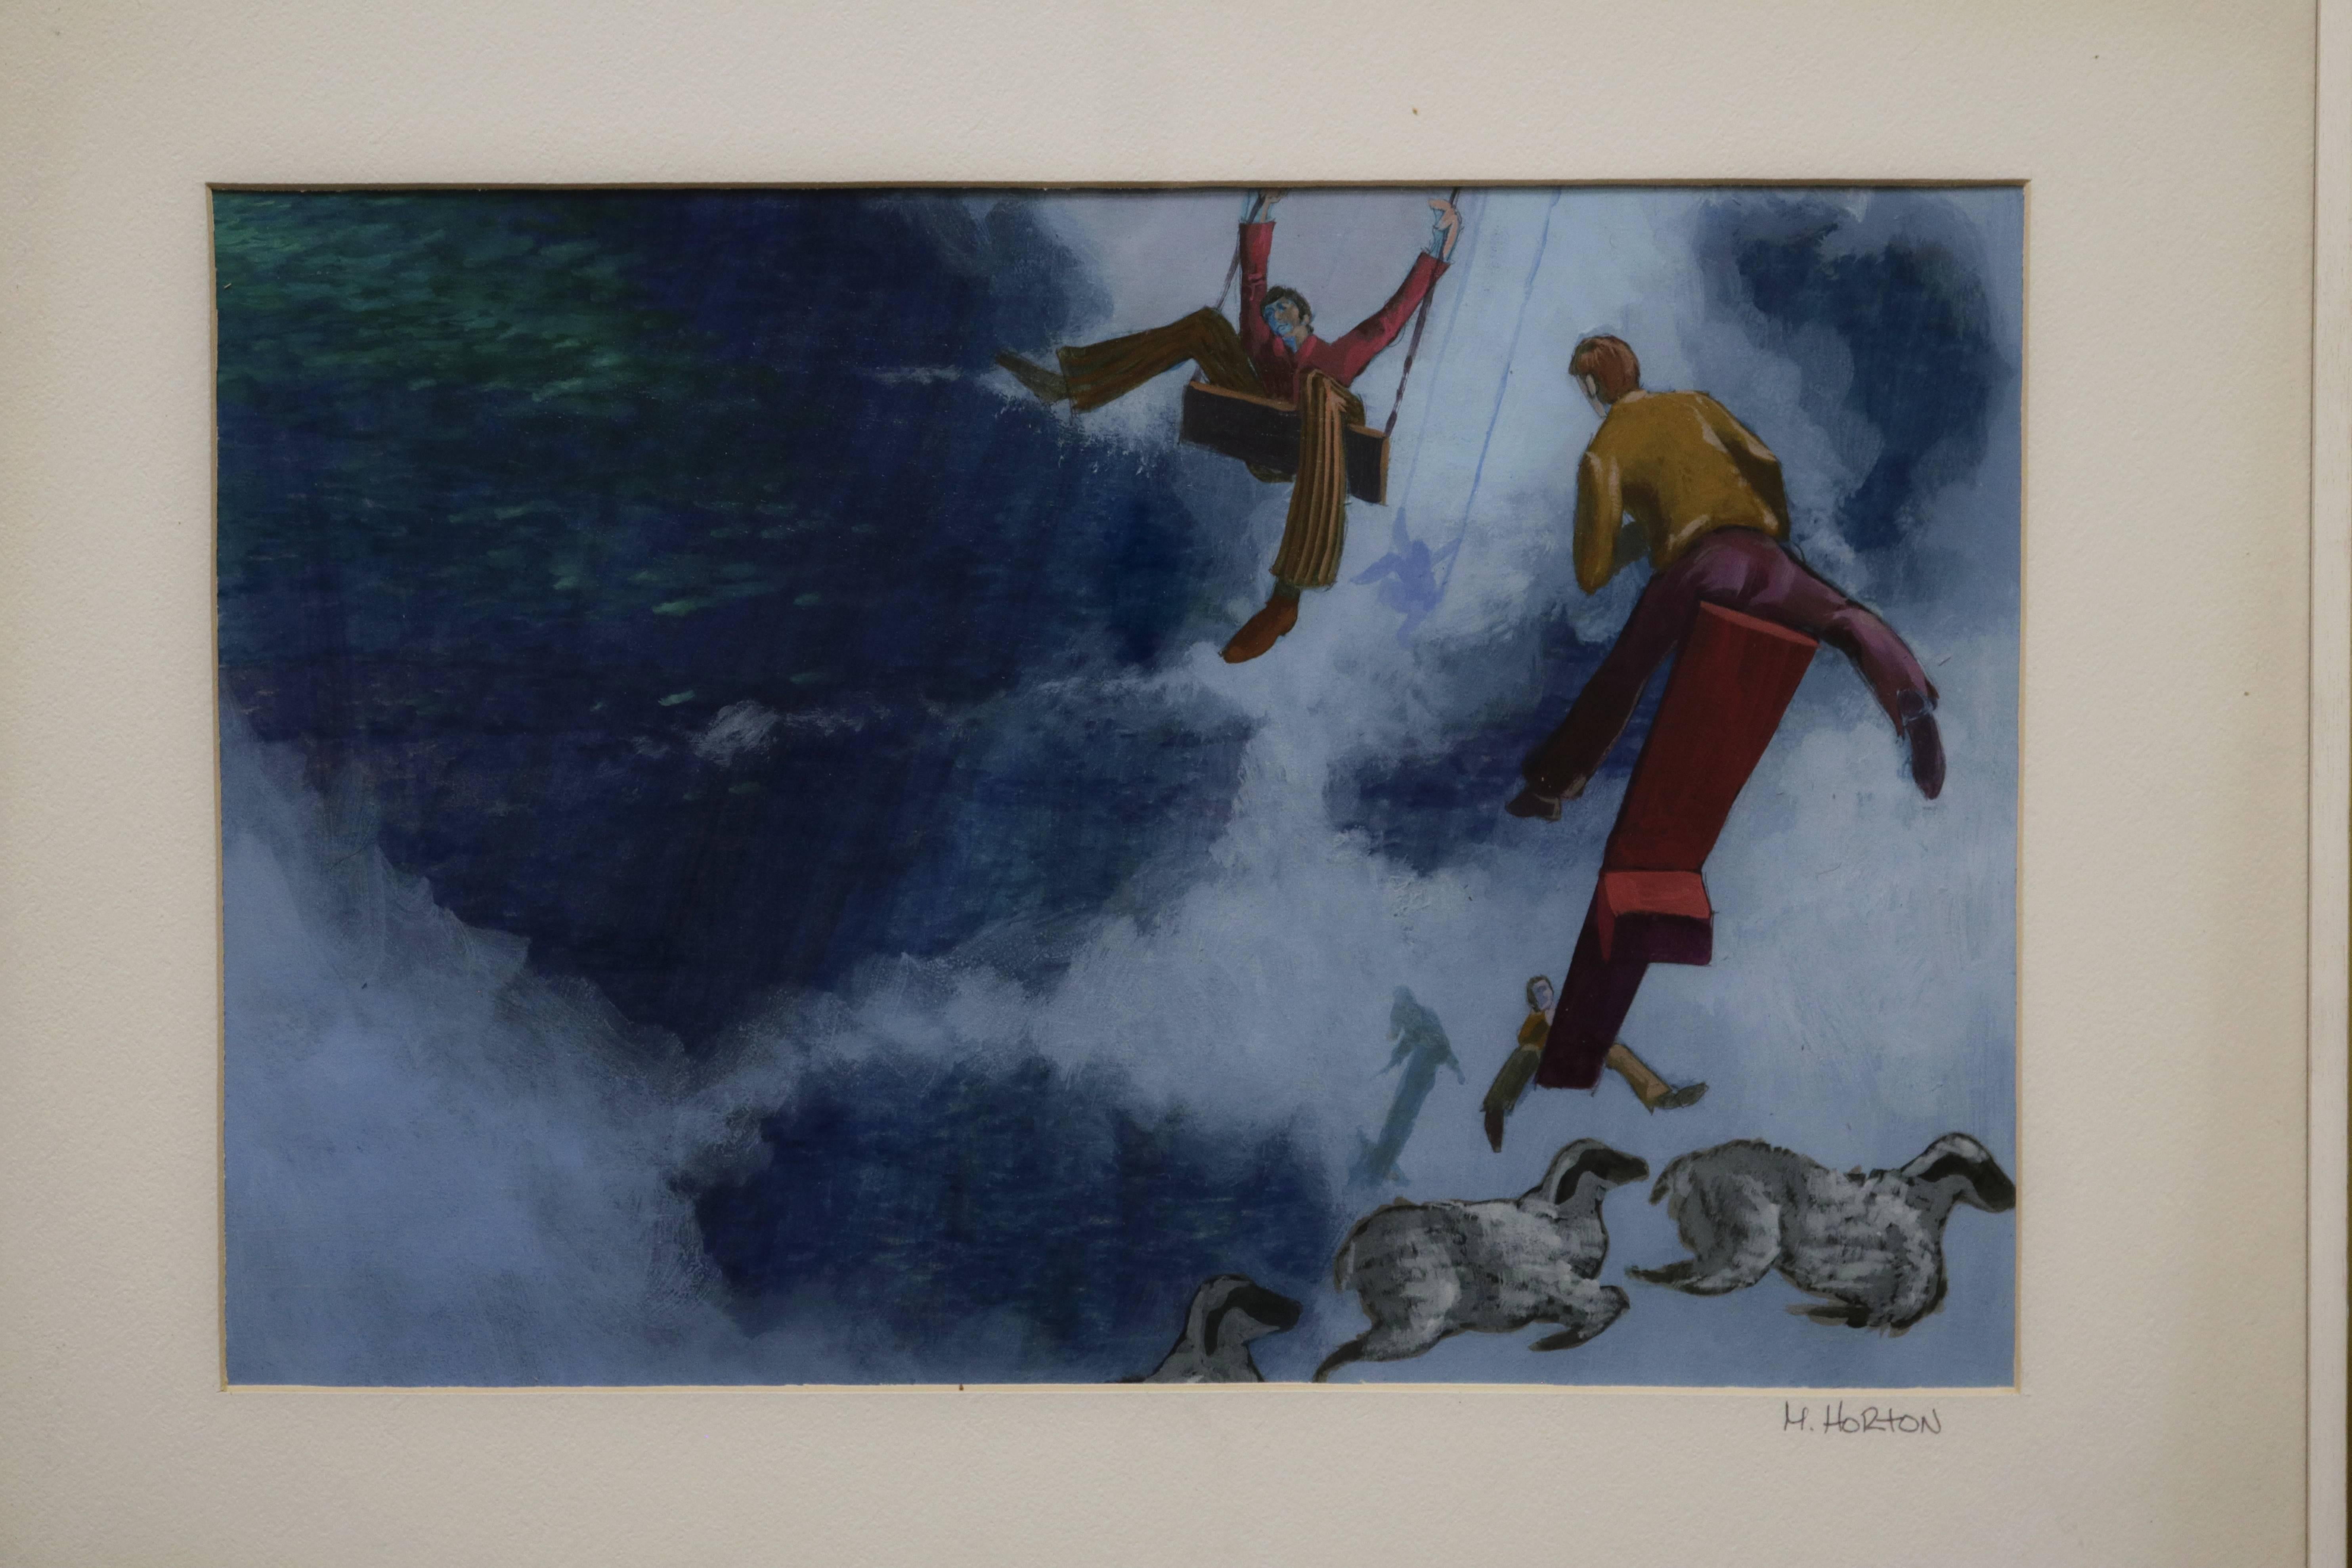 This framed gouache painting features a surrealist scene of people on a children's set of swings and see-saw above jumping sheep’s. In the background are clouds and the ocean seen from above. Signed M. Horton.